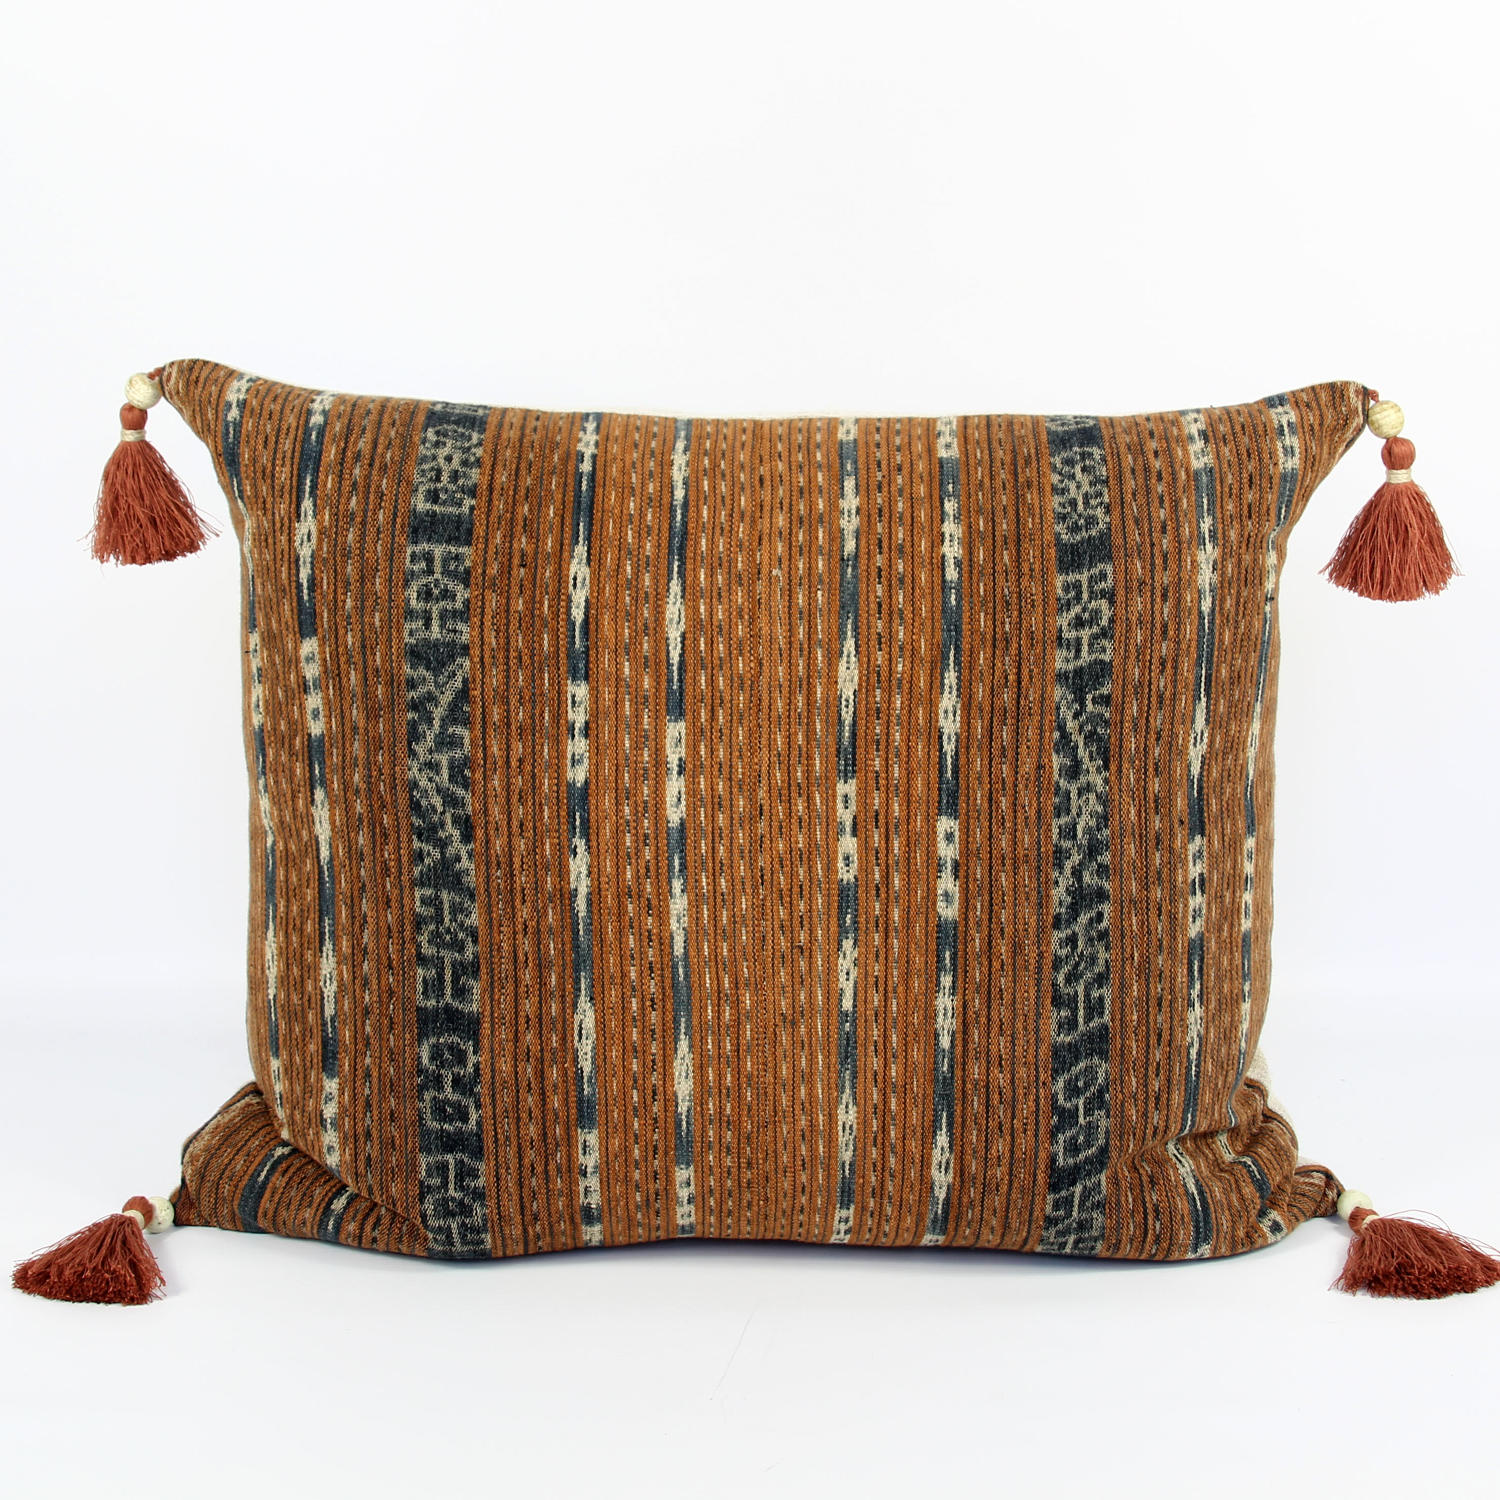 Large Ikat Cushions with Beaded Tassels